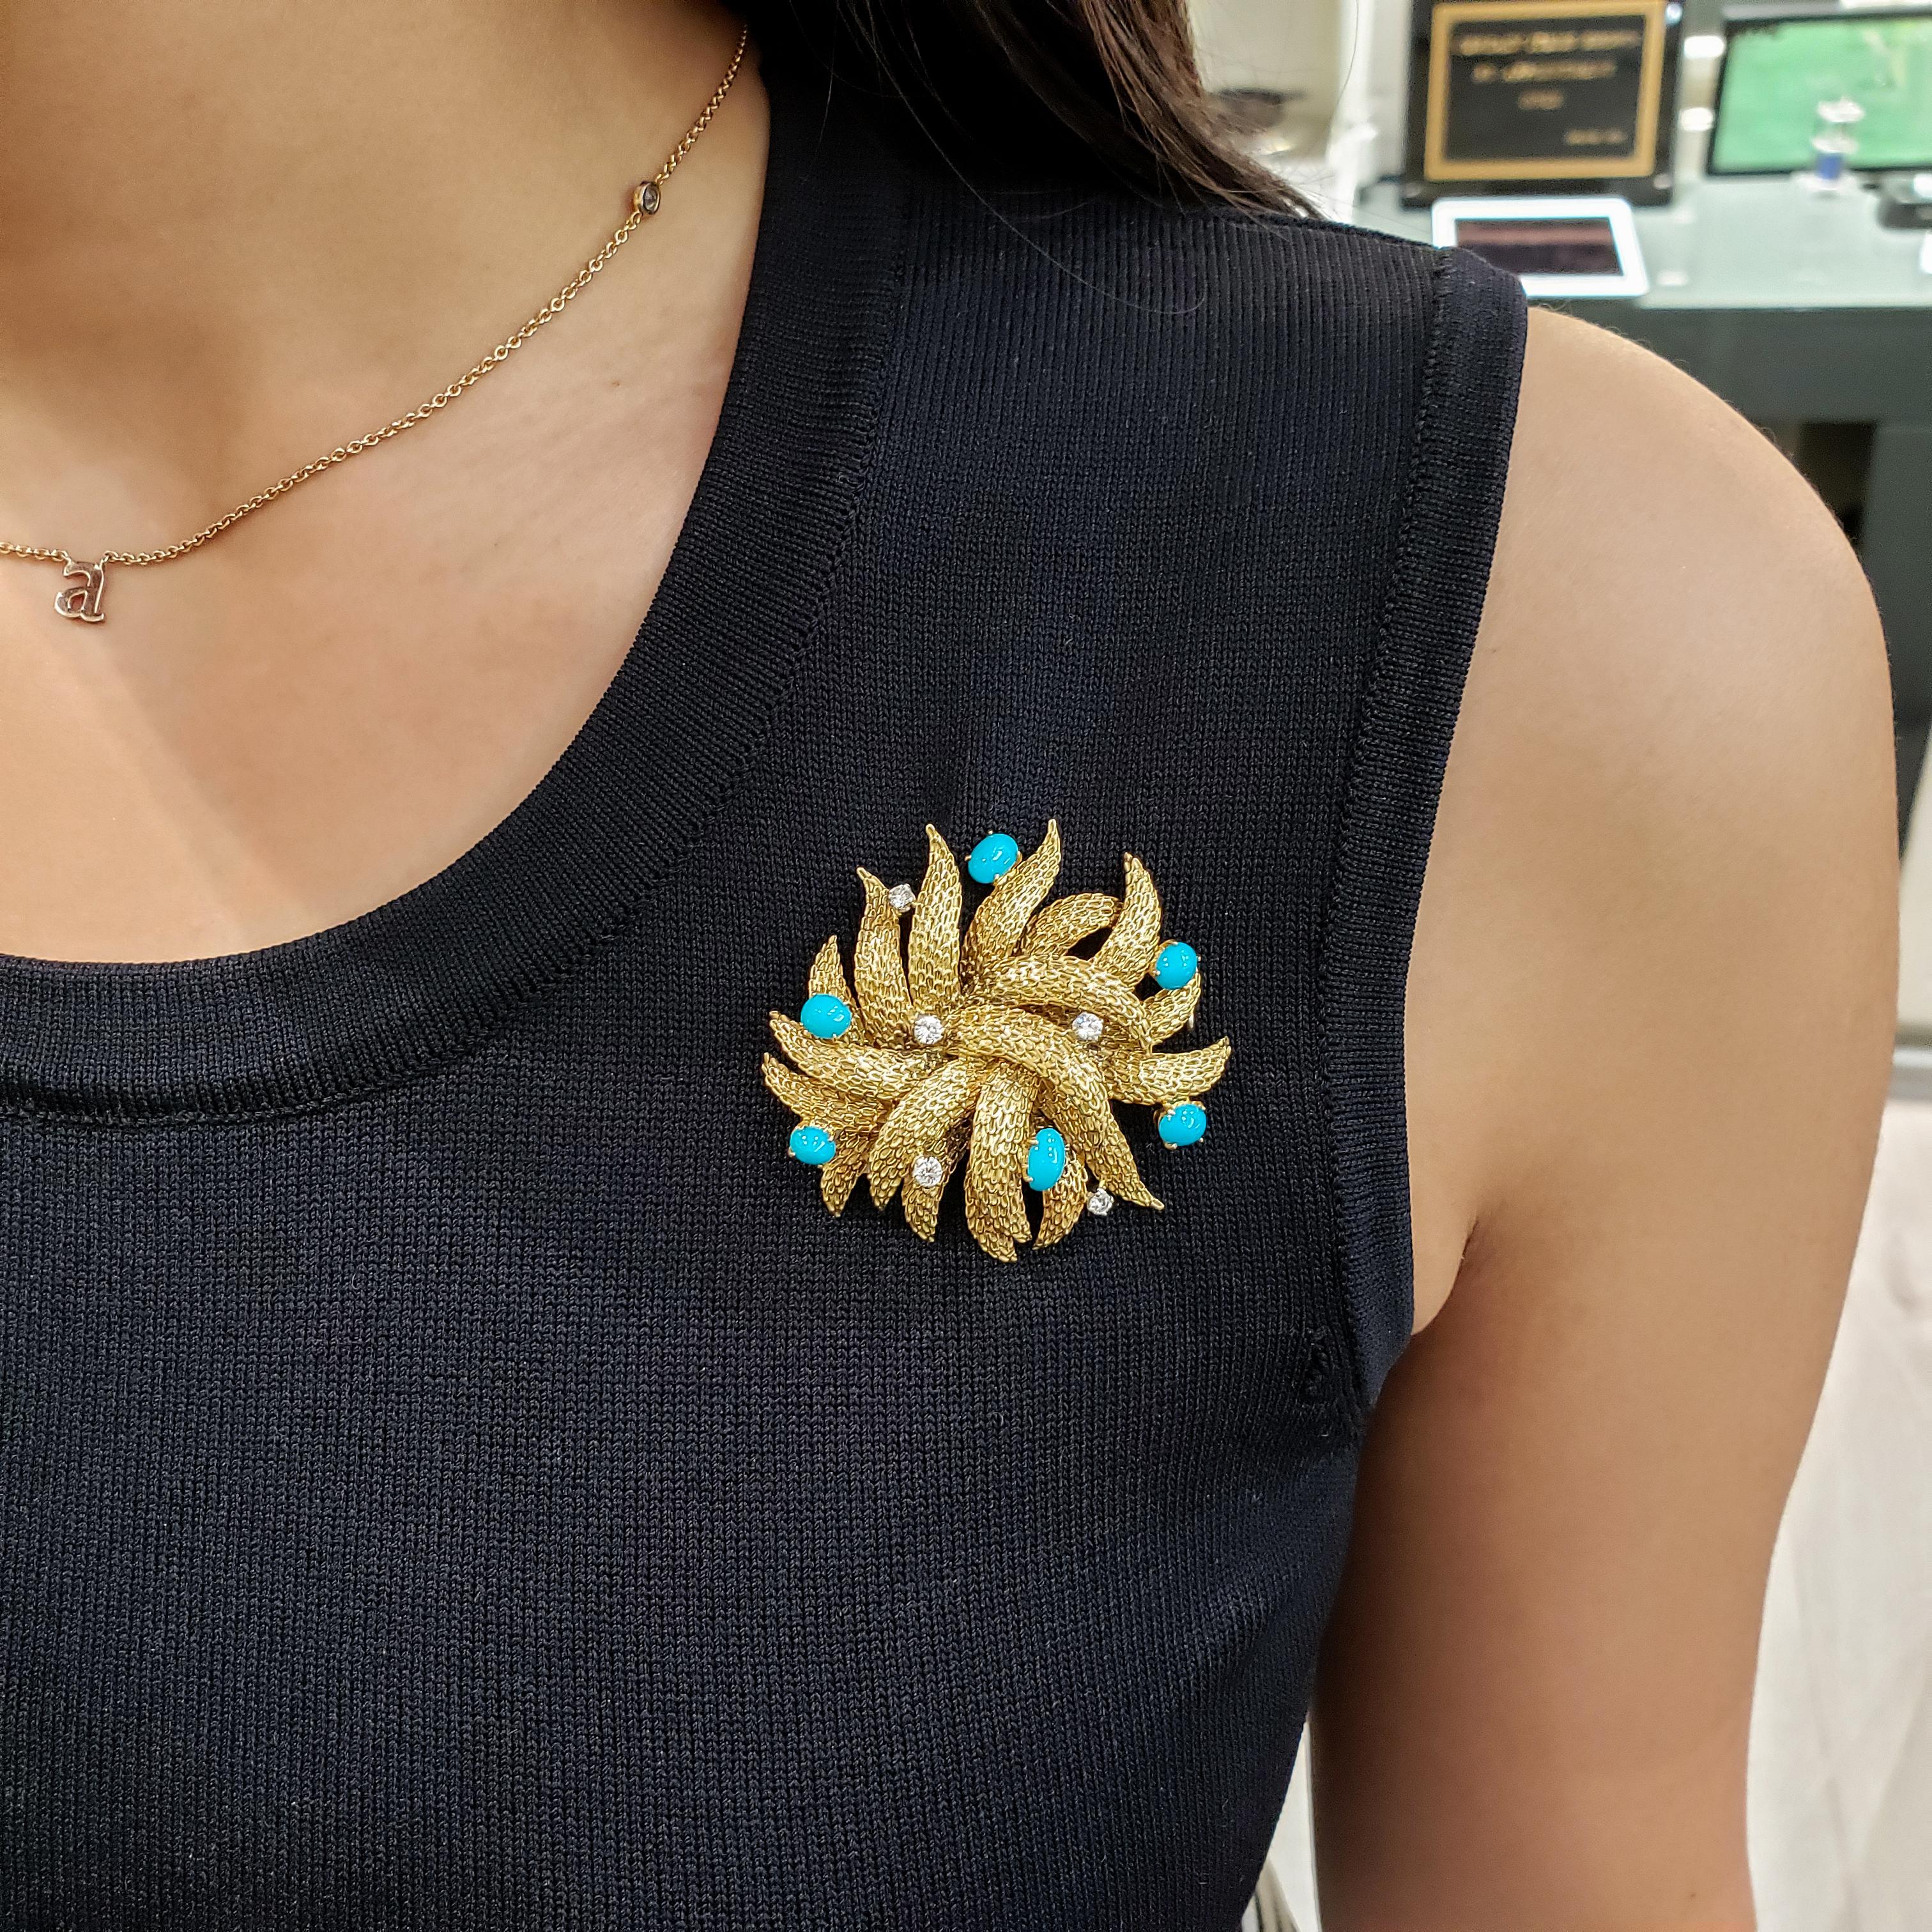 A reef-like figure made in 18 karat yellow gold, accented by 6 cabochon turquoise and 5 round diamonds. hand-engraved.